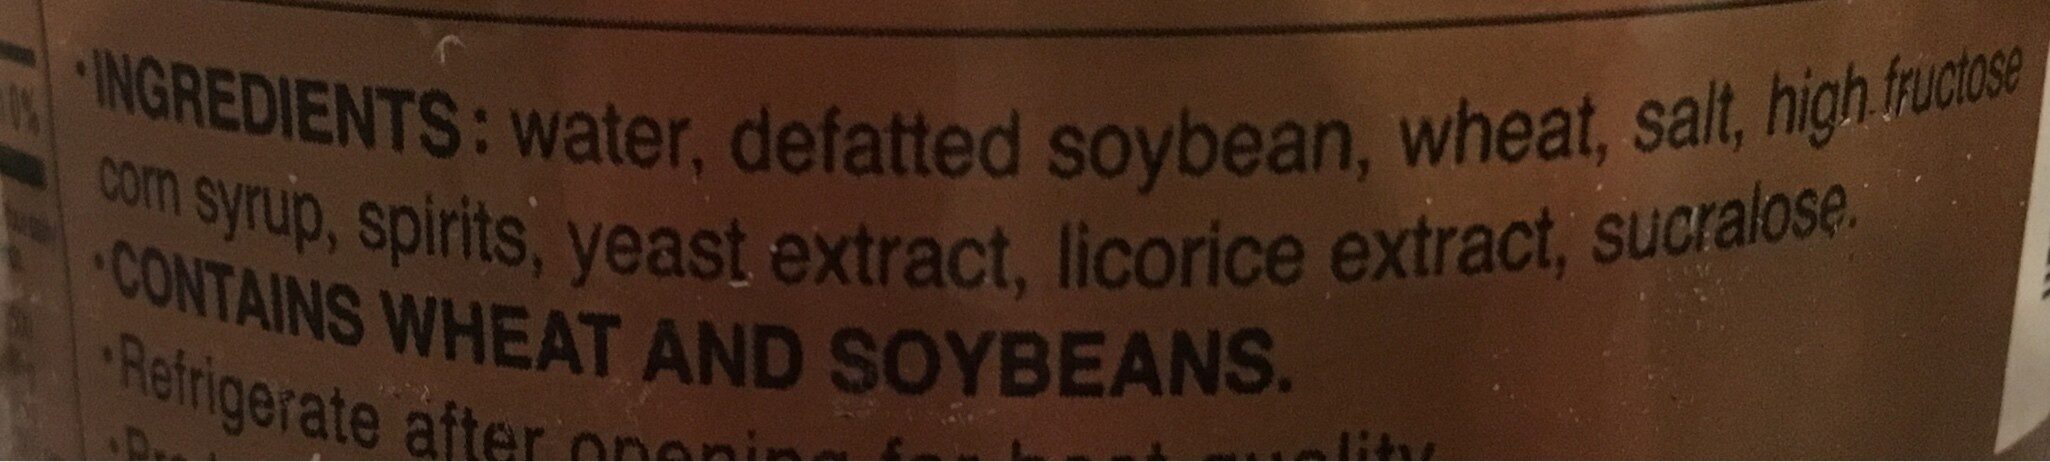 Naturally brewed soy sauce - Ingredients